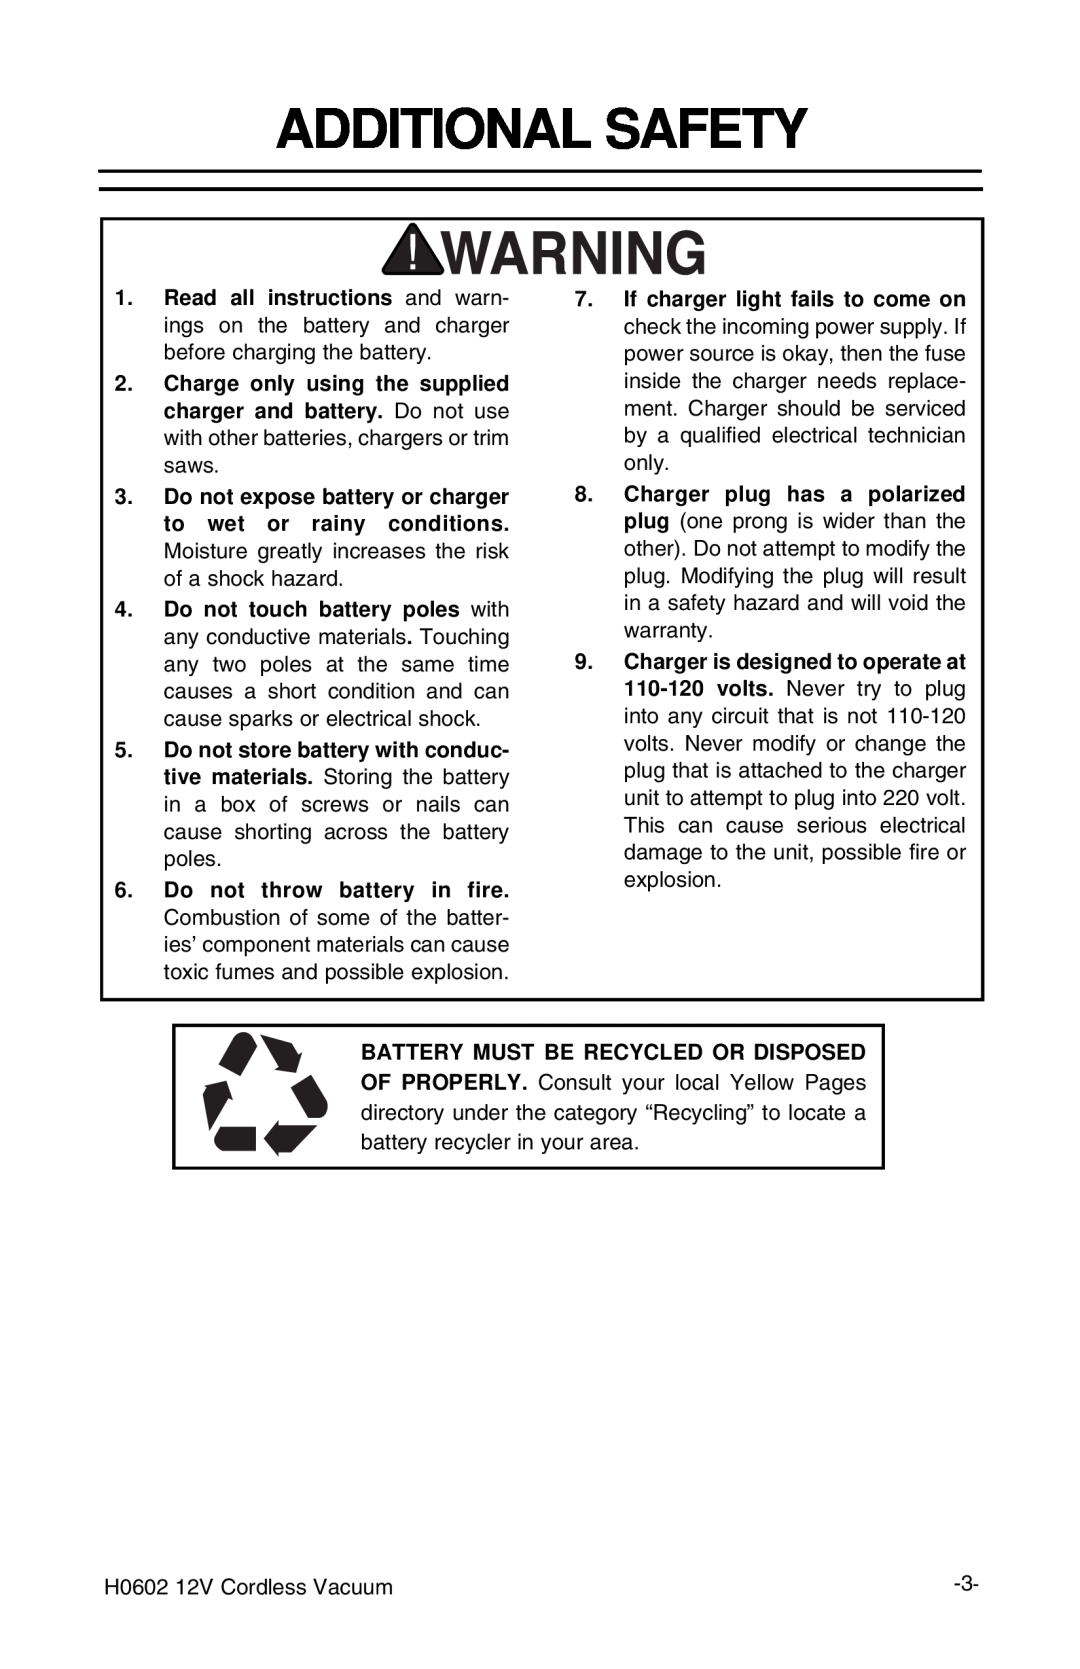 Grizzly H0602 instruction manual Additional Safety 